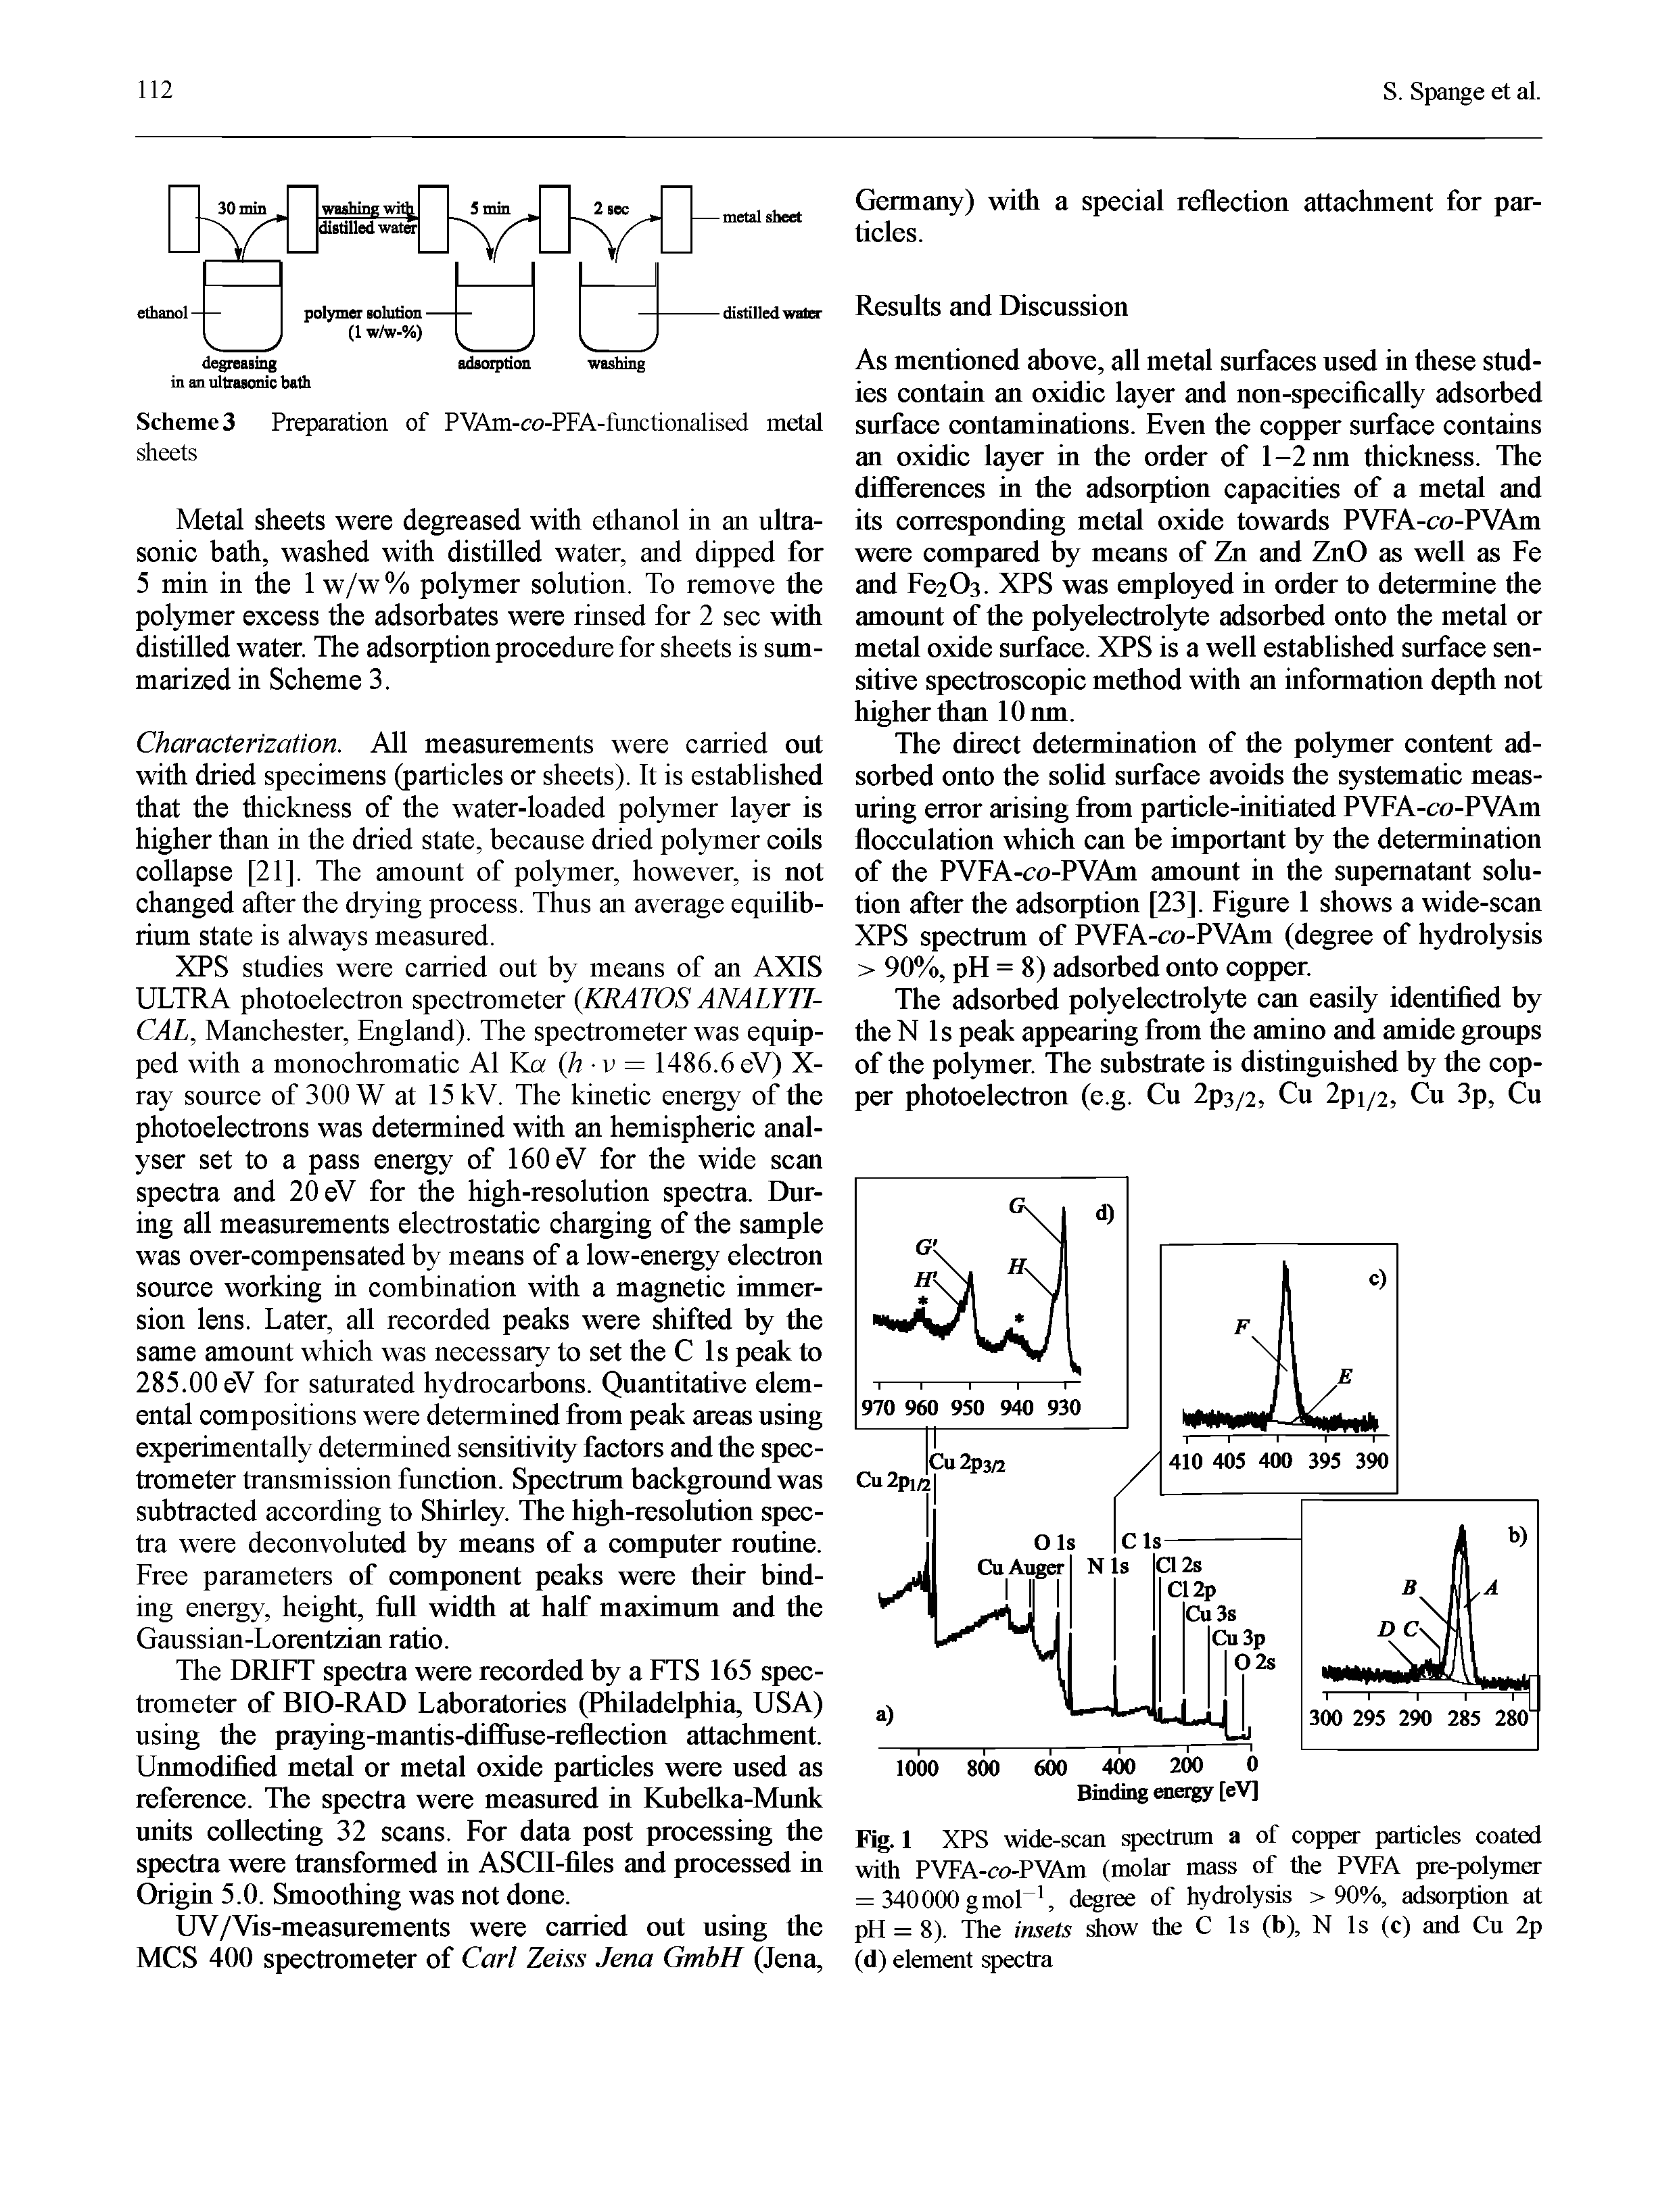 Fig. 1 XPS wide-scan spectrum a of copper particles coated with PVFA-co-PVAm (molar mass of the PVFA pre-polymer = 340000 g mol degree of hydrolysis >90%, adsorption at pH = 8). The insets show the C Is (b), N Is (c) and Cu 2p (d) element spectra...